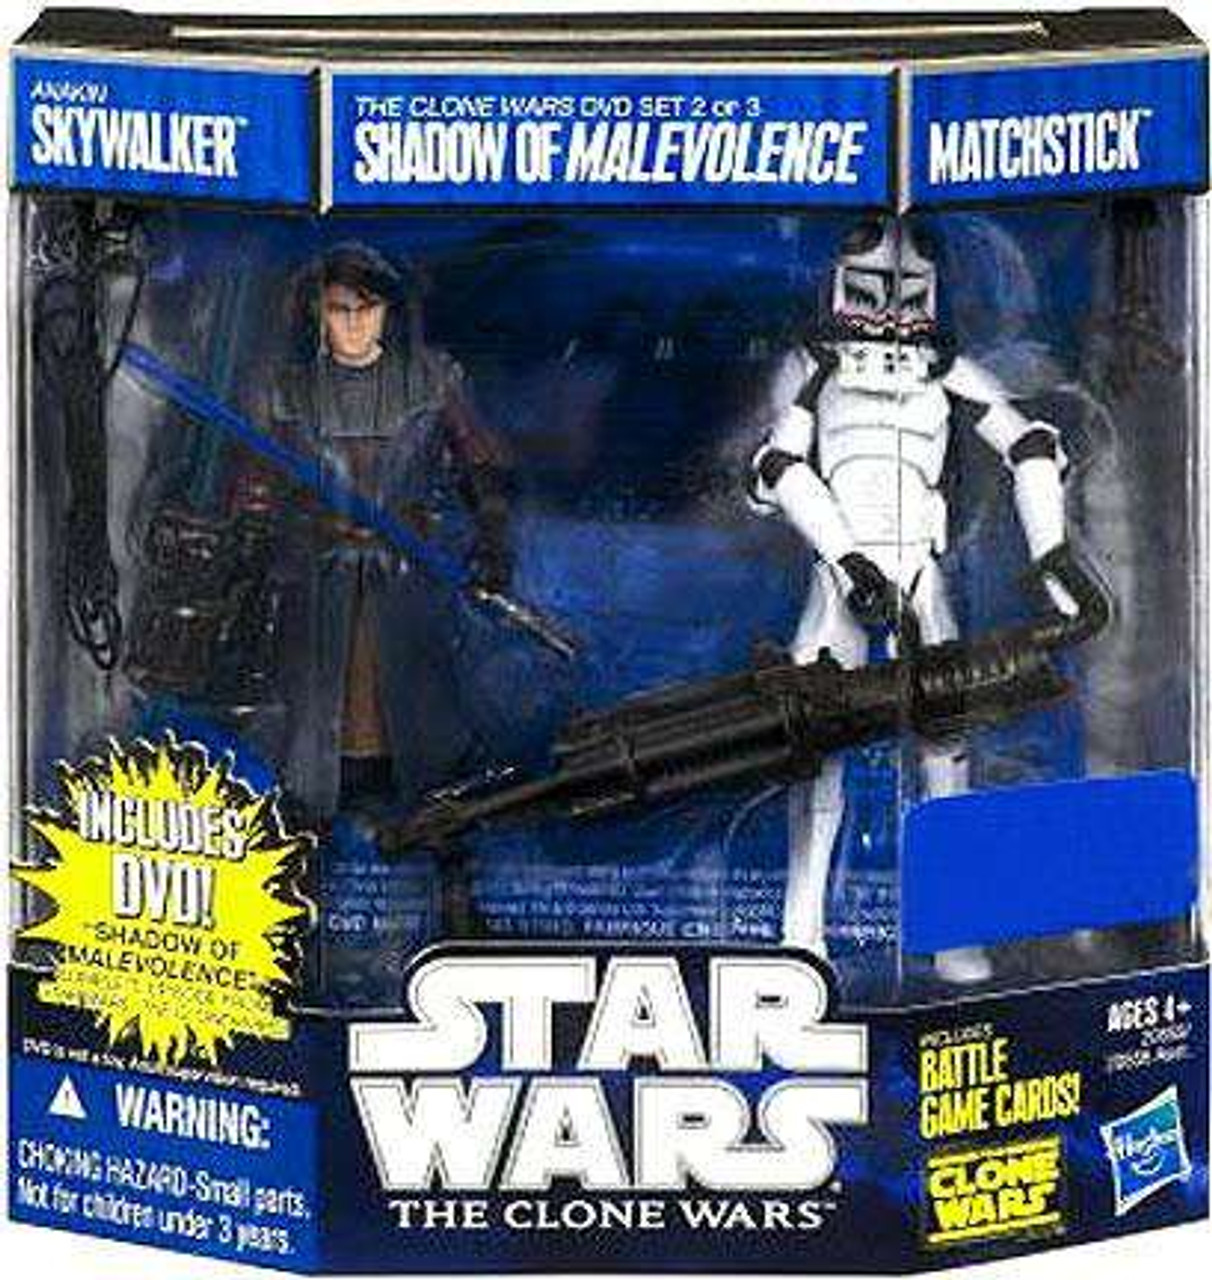 Star Wars The Clone Wars Anakin Skywalker Matchstick Exclusive 3 75 Action Figure Dvd 2 Pack 2 Shadow Of Malevolence Hasbro Toys Toywiz - clone wars 2 codes roblox